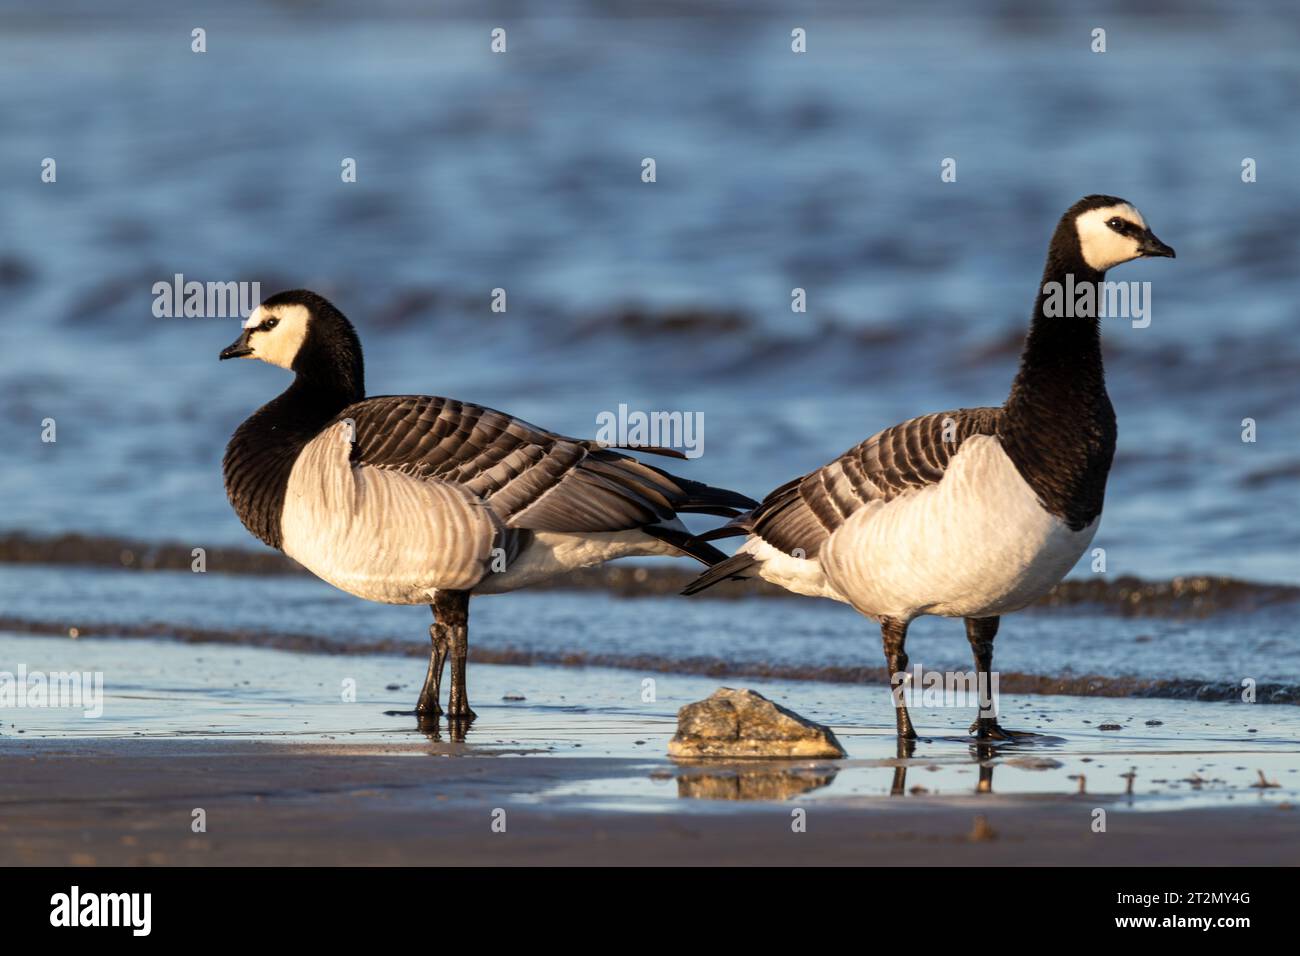 barnacle goose portrait at the beach Stock Photo